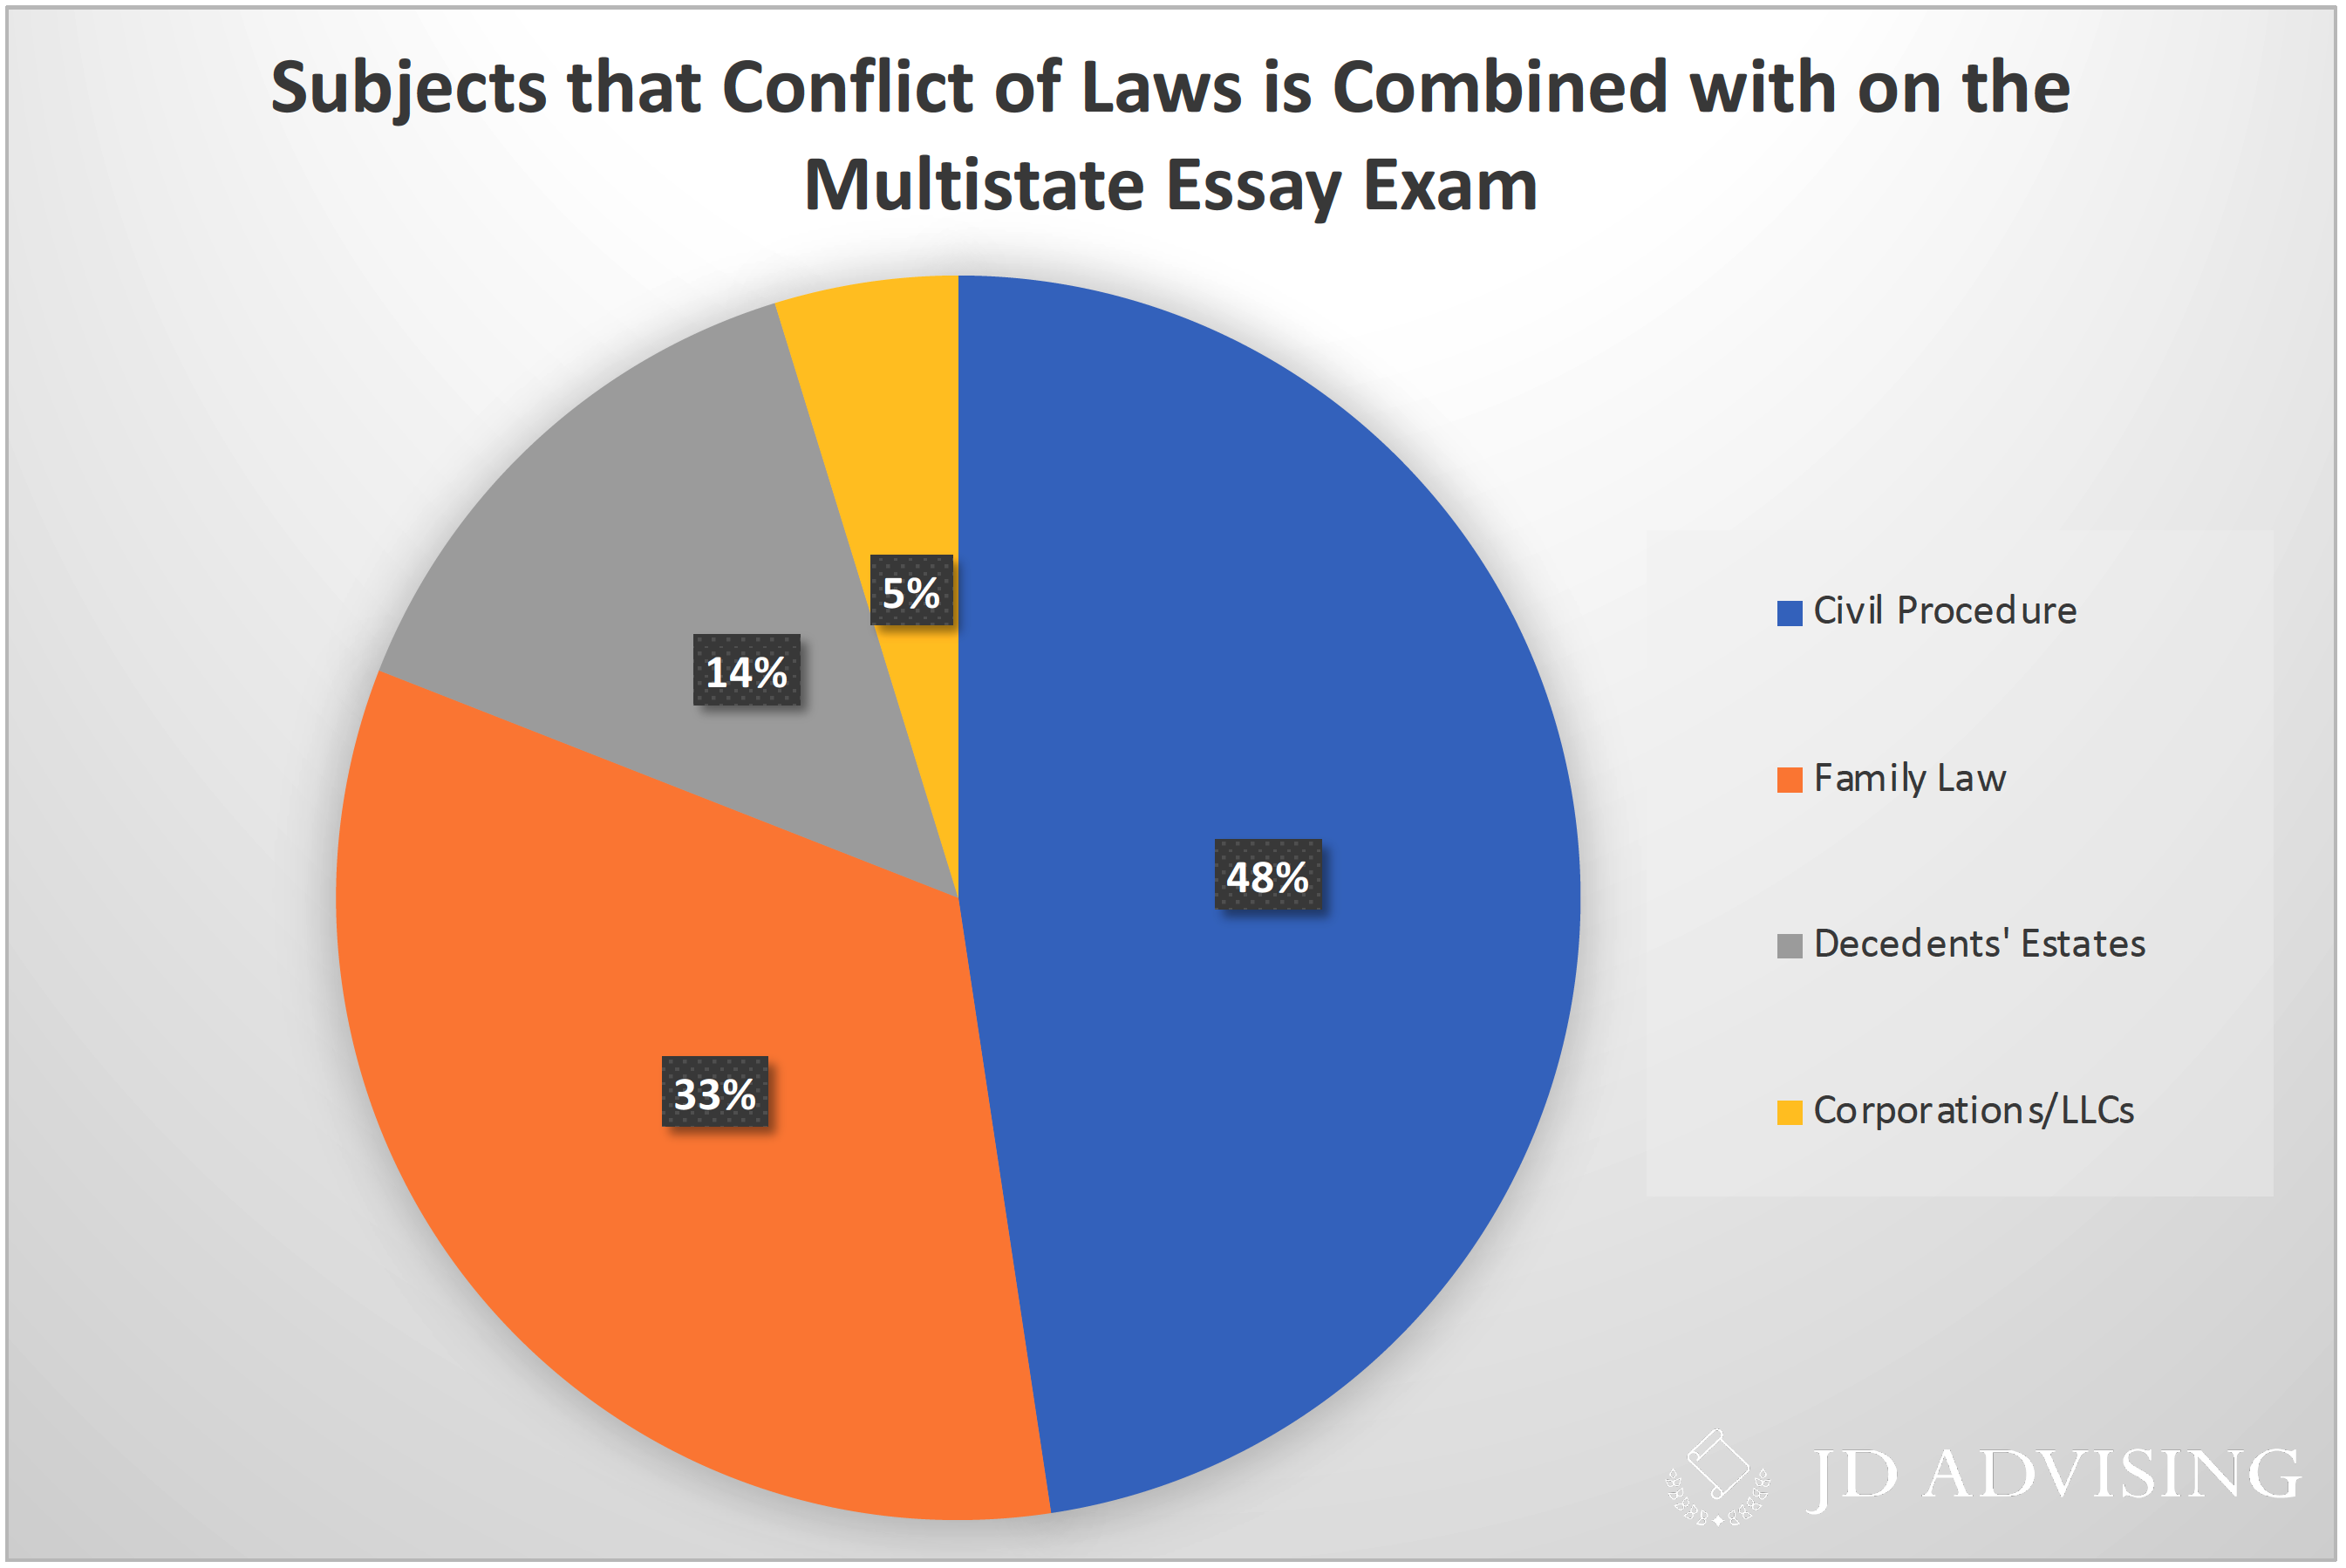 Subjects that Conflict of Laws is combined with on the Multistate Essay Exam